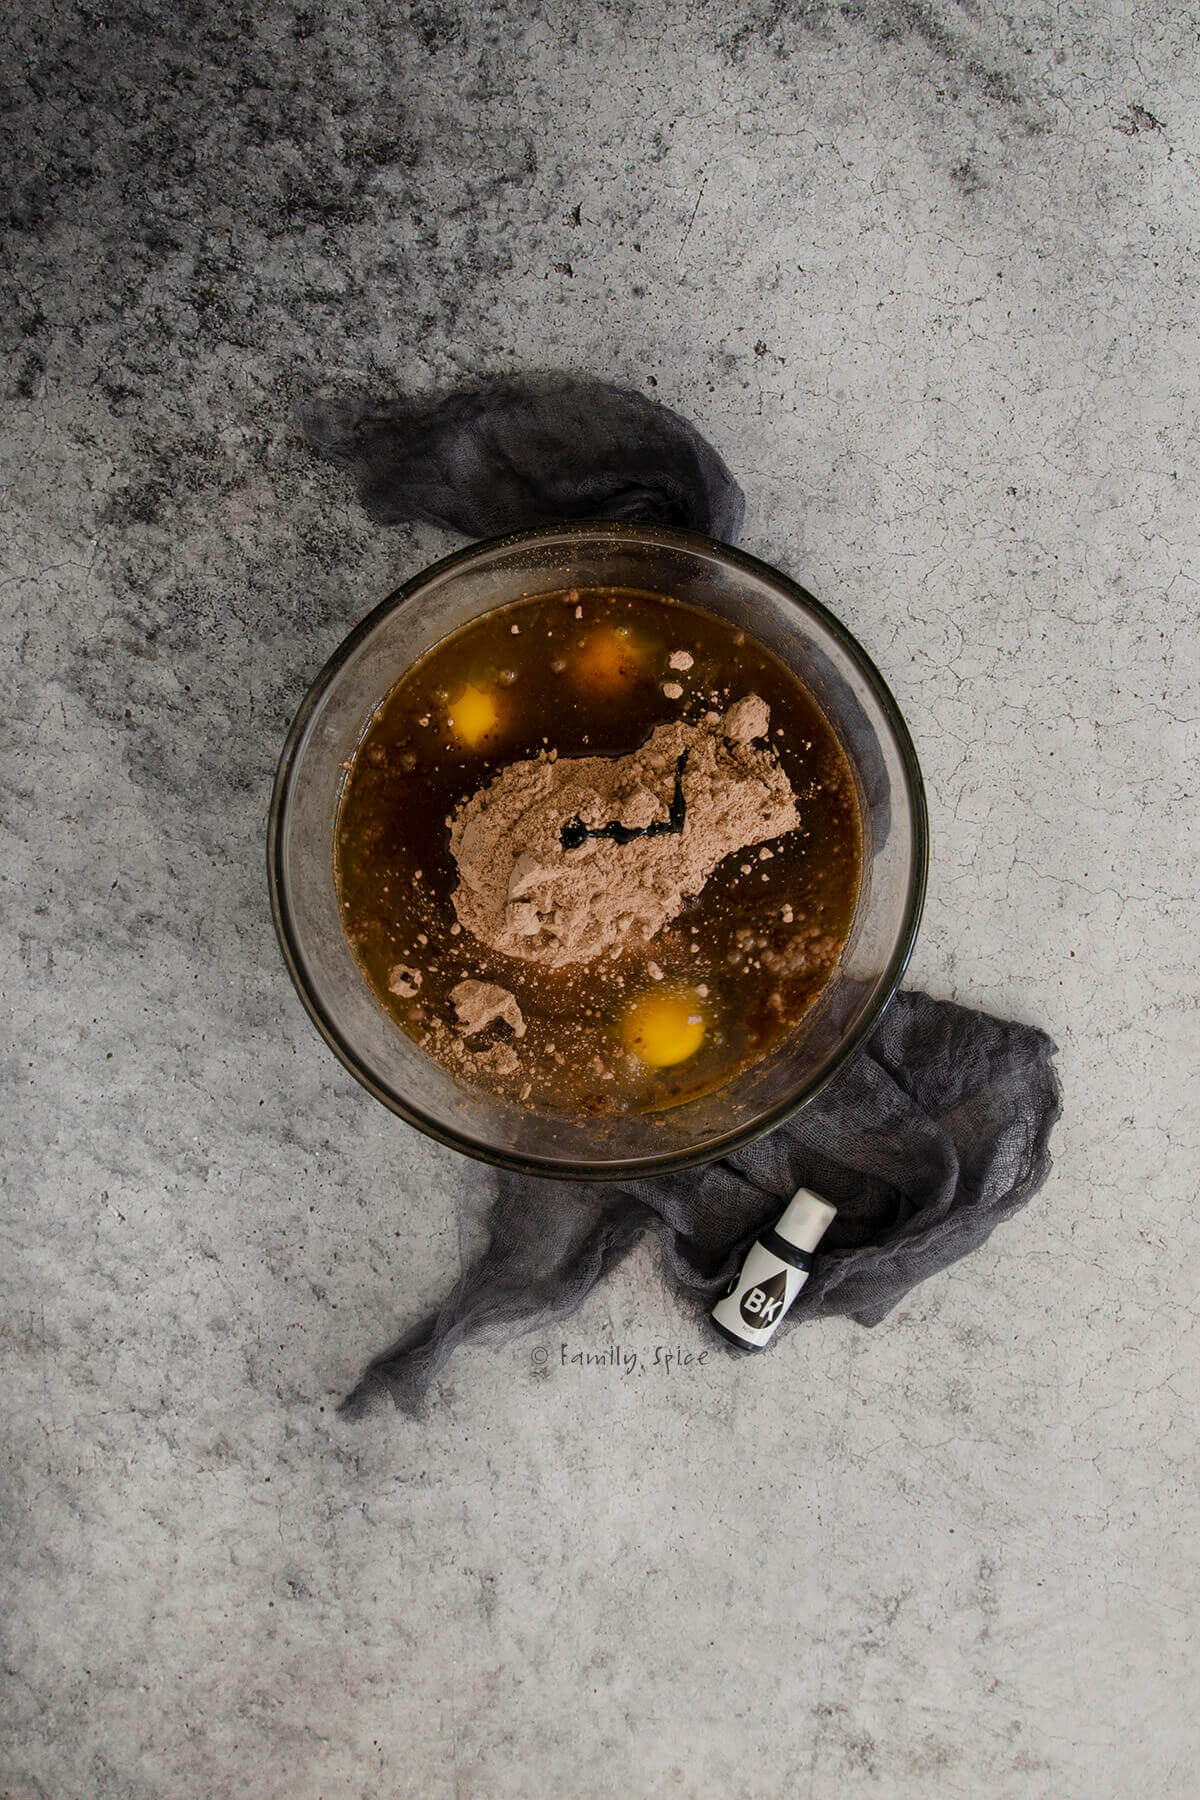 A glass mixing bowl with chocolate cake mix, eggs, oil, water and black food coloring in it